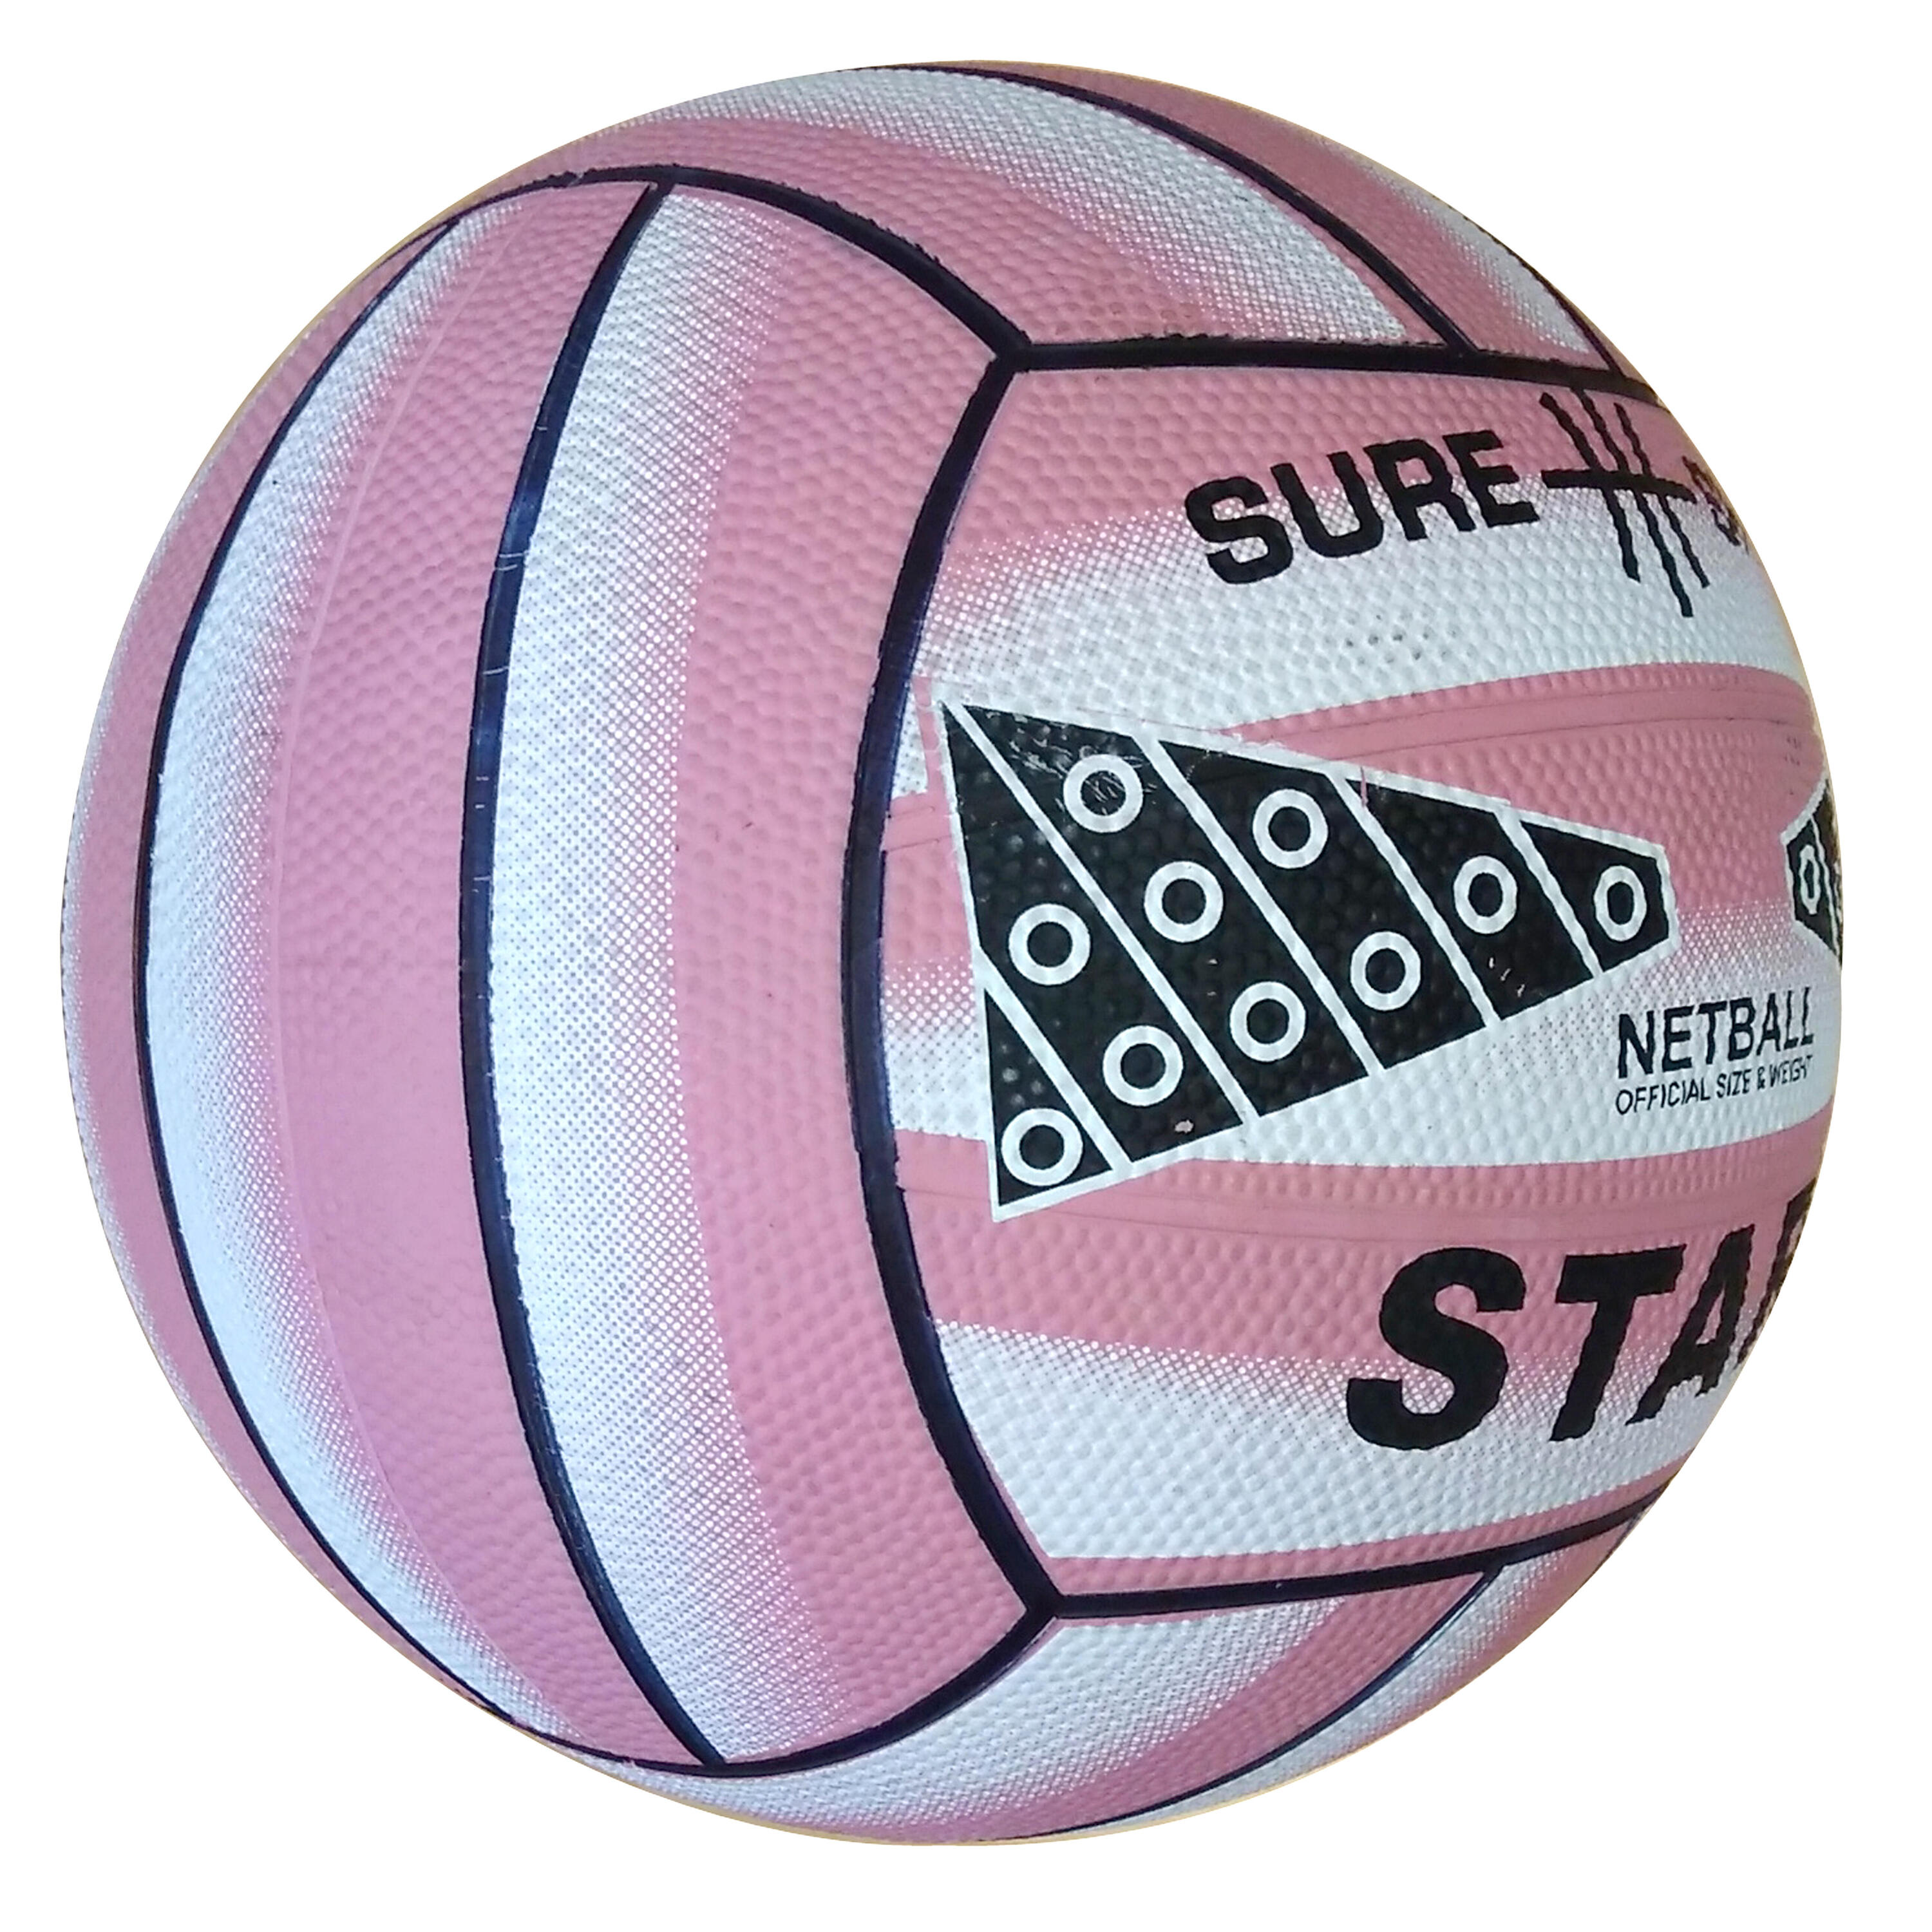 Sure Shot Star Netball size 5 in Pink 2/5